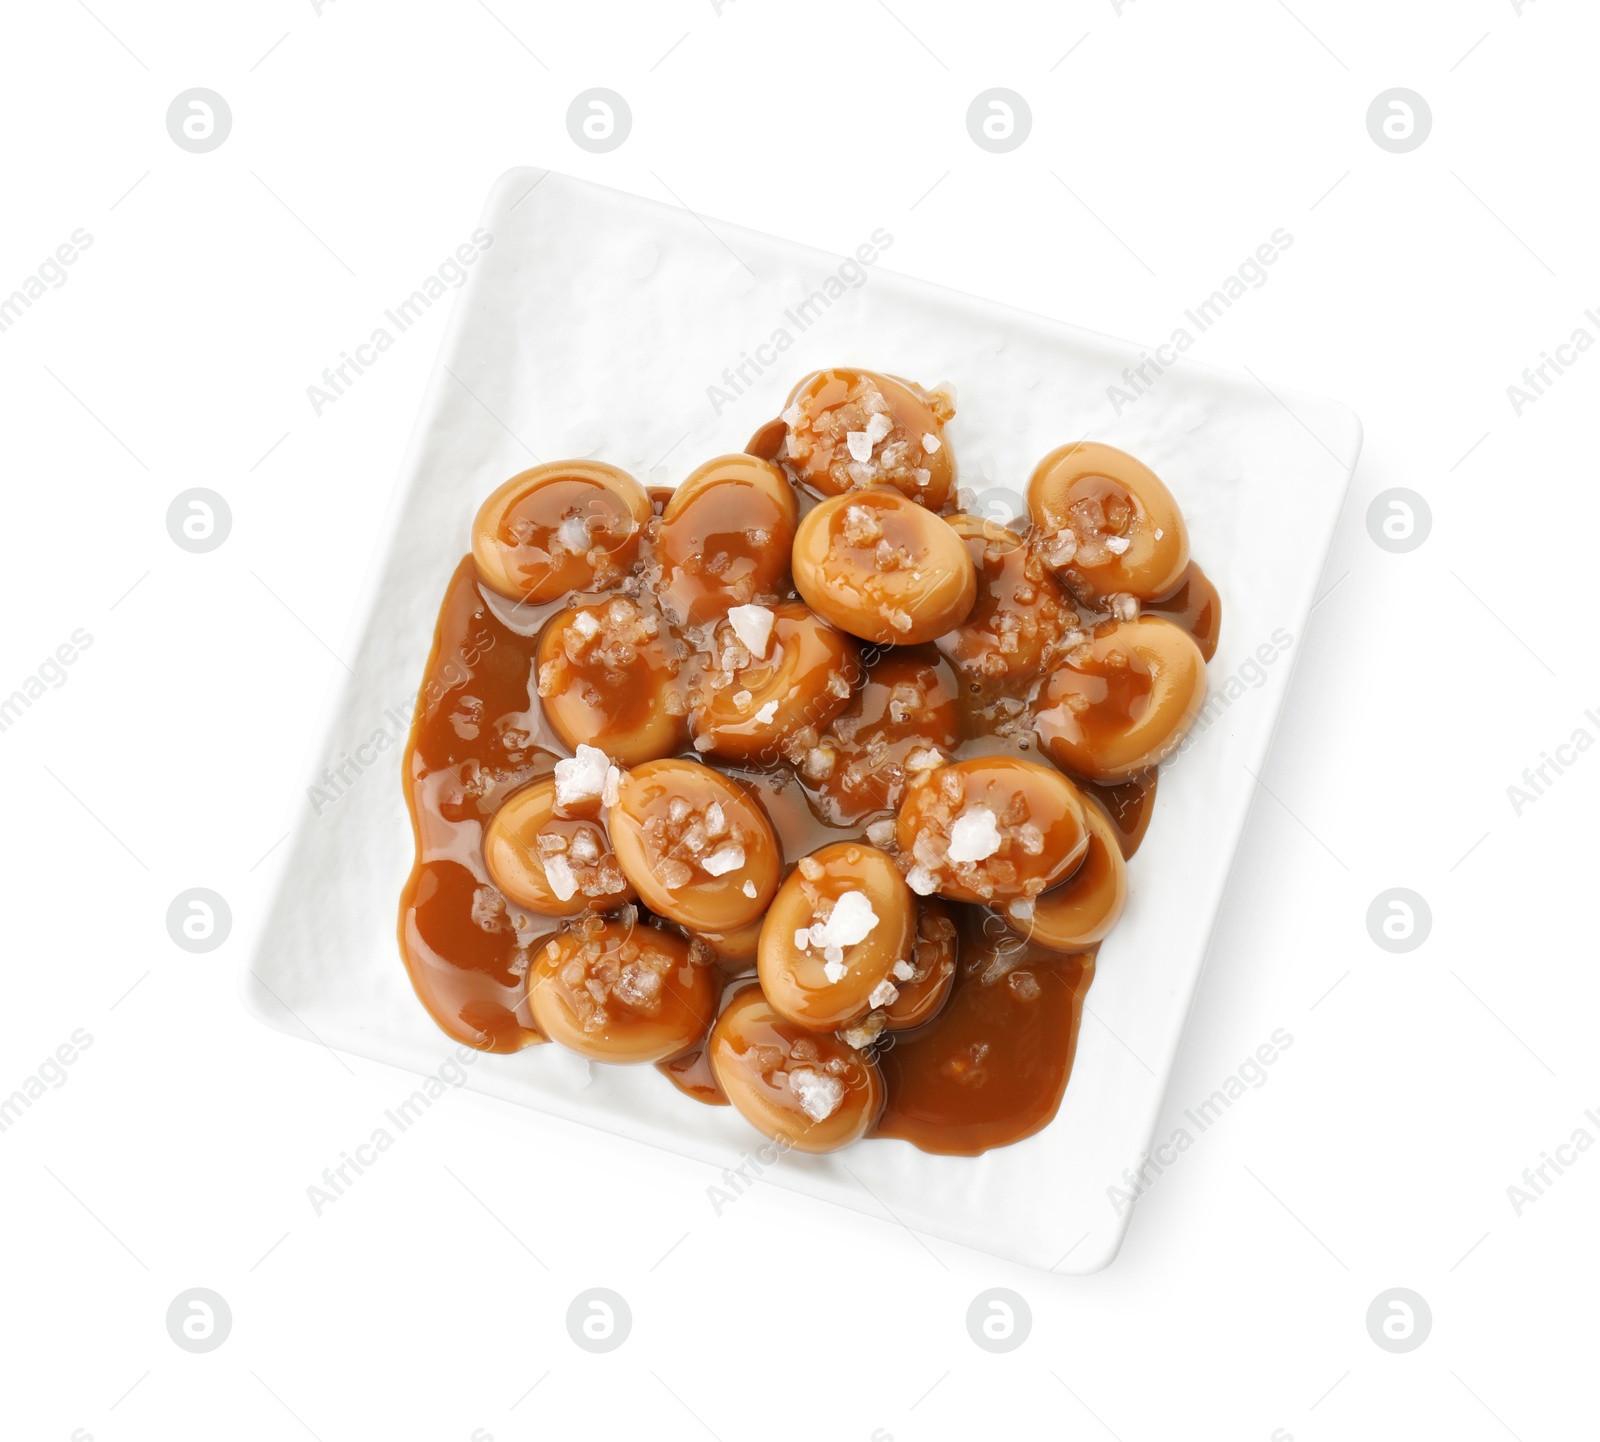 Photo of Plate with tasty candies, caramel sauce and salt isolated on white, top view